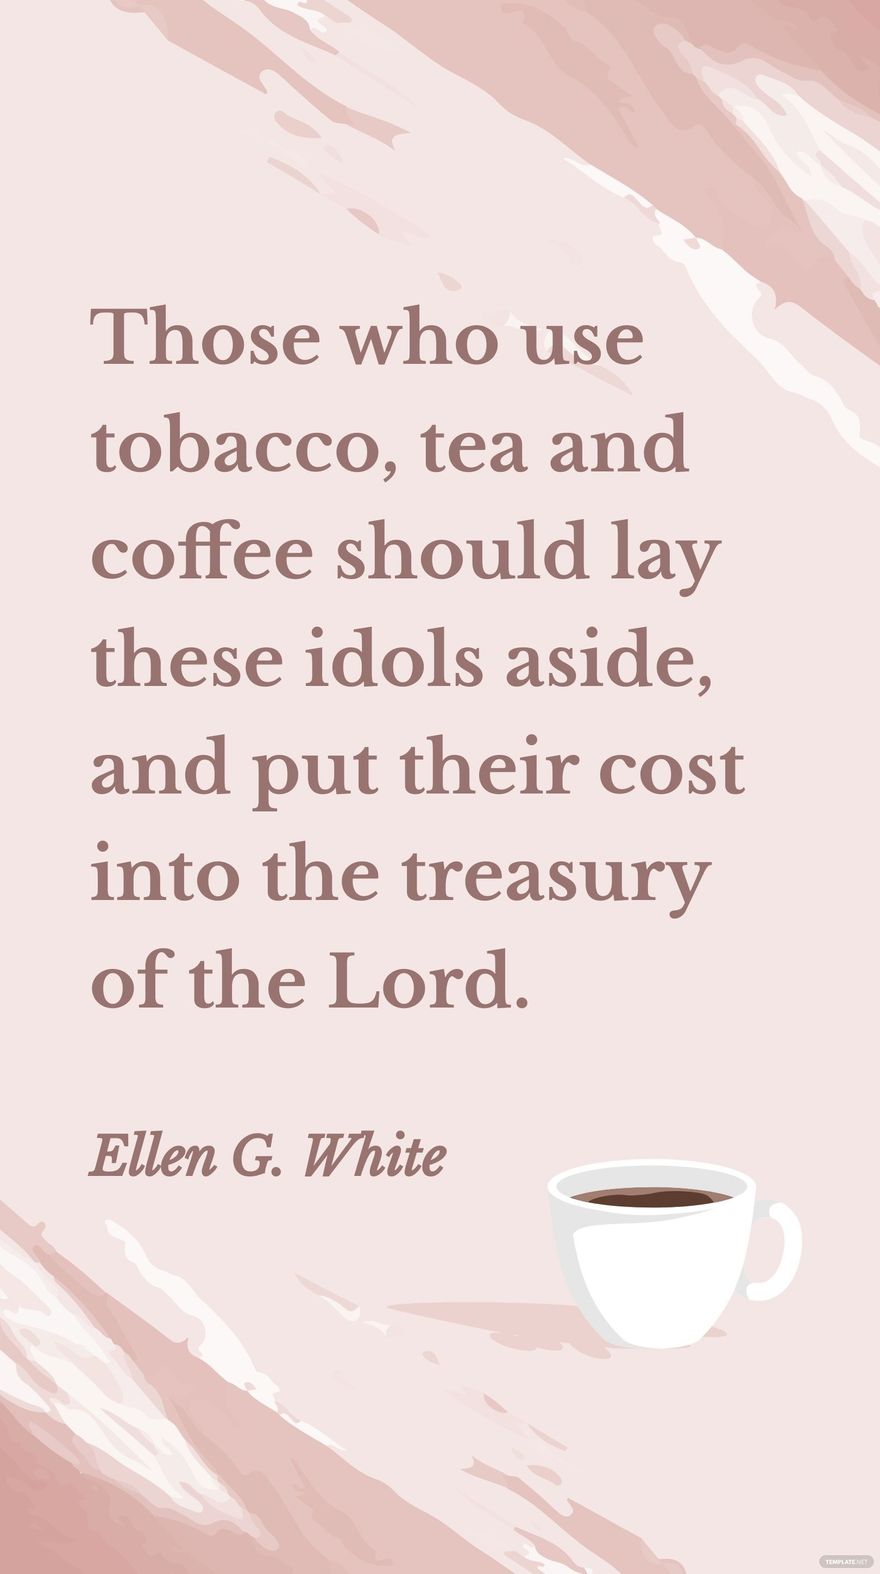 Free Ellen G. White - Those who use tobacco, tea and coffee should lay these idols aside, and put their cost into the treasury of the Lord. in JPG